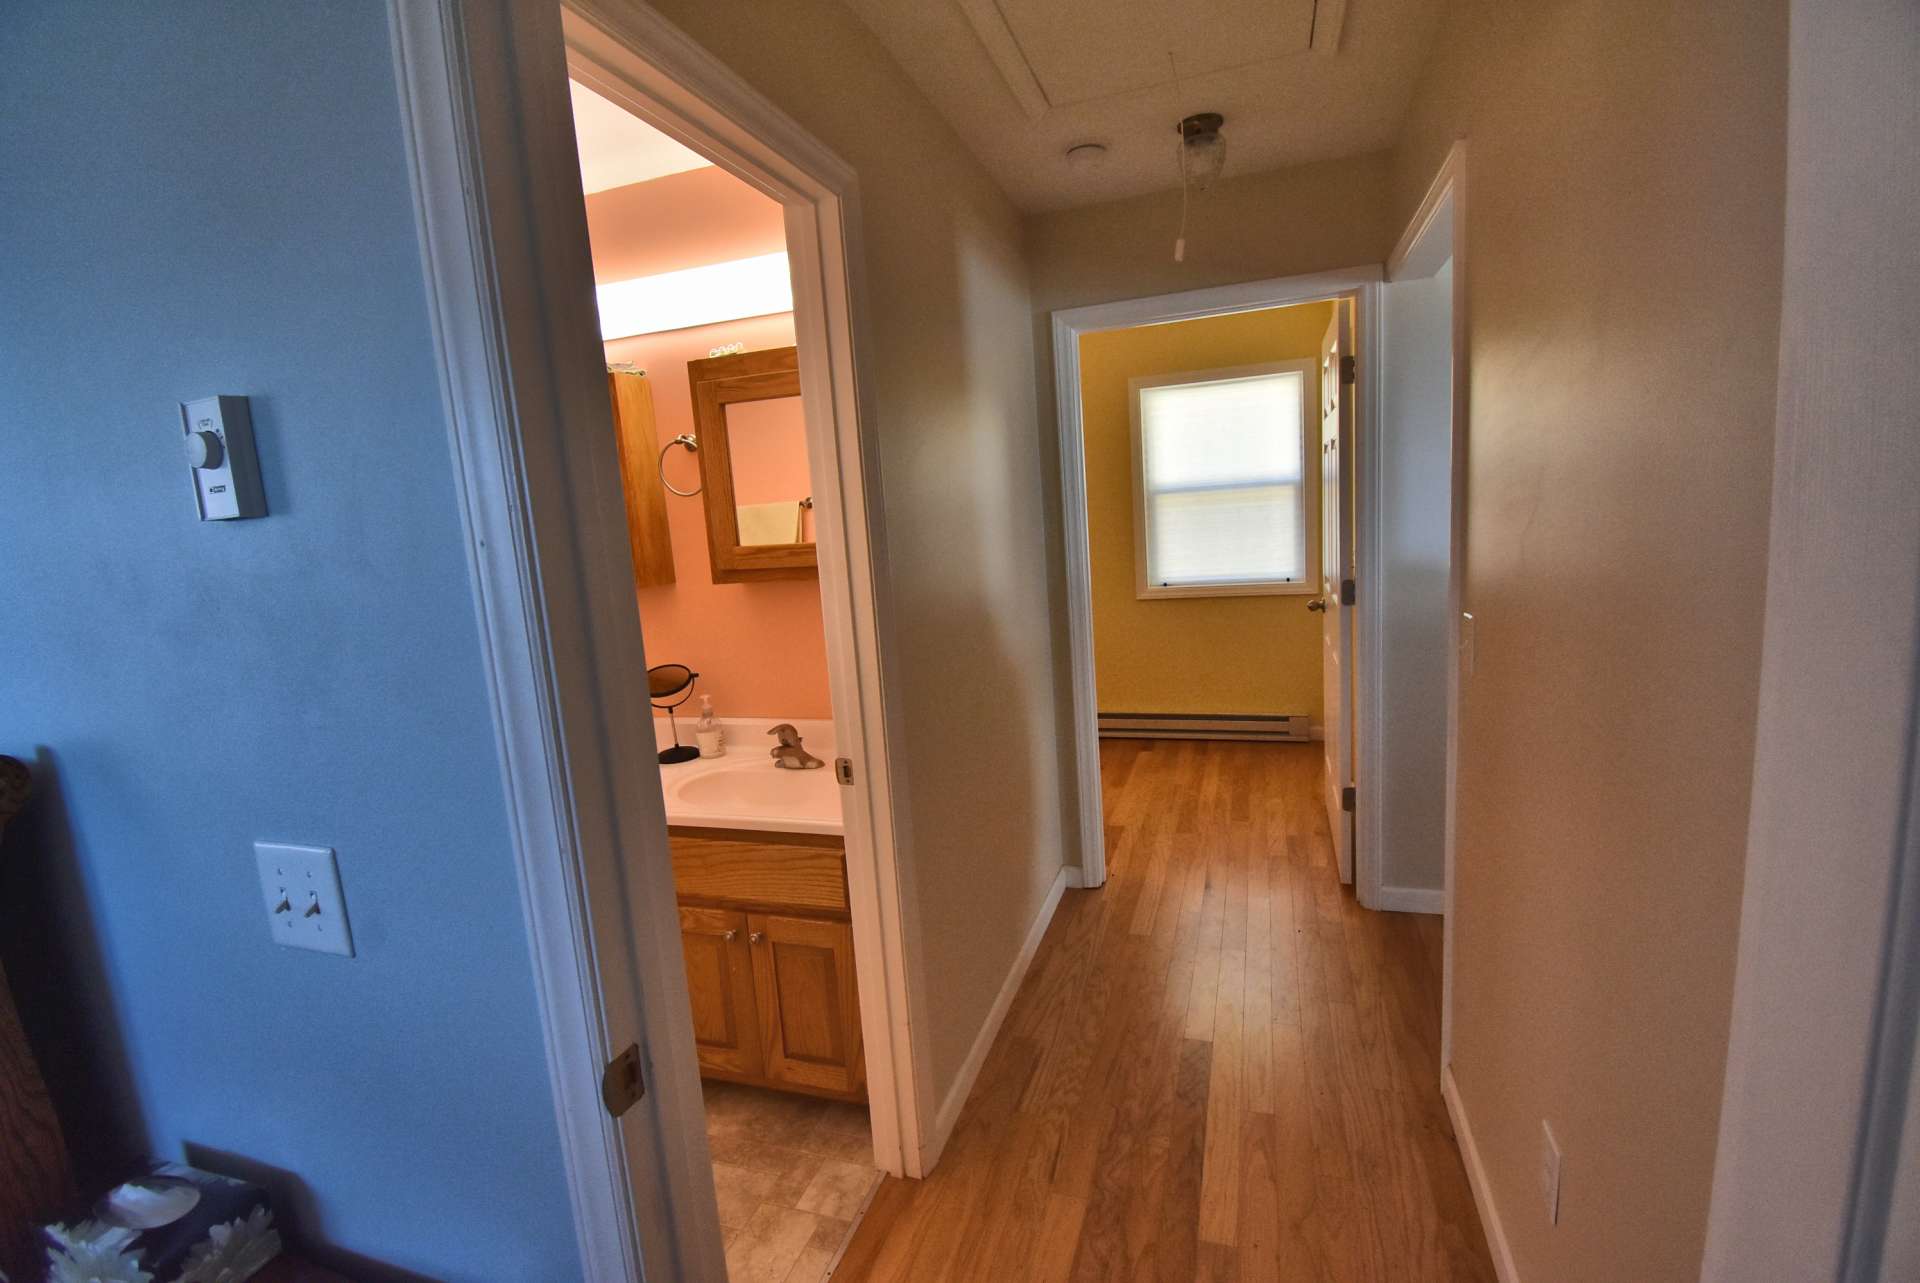 There are two bedrooms and a full bath on the main level.